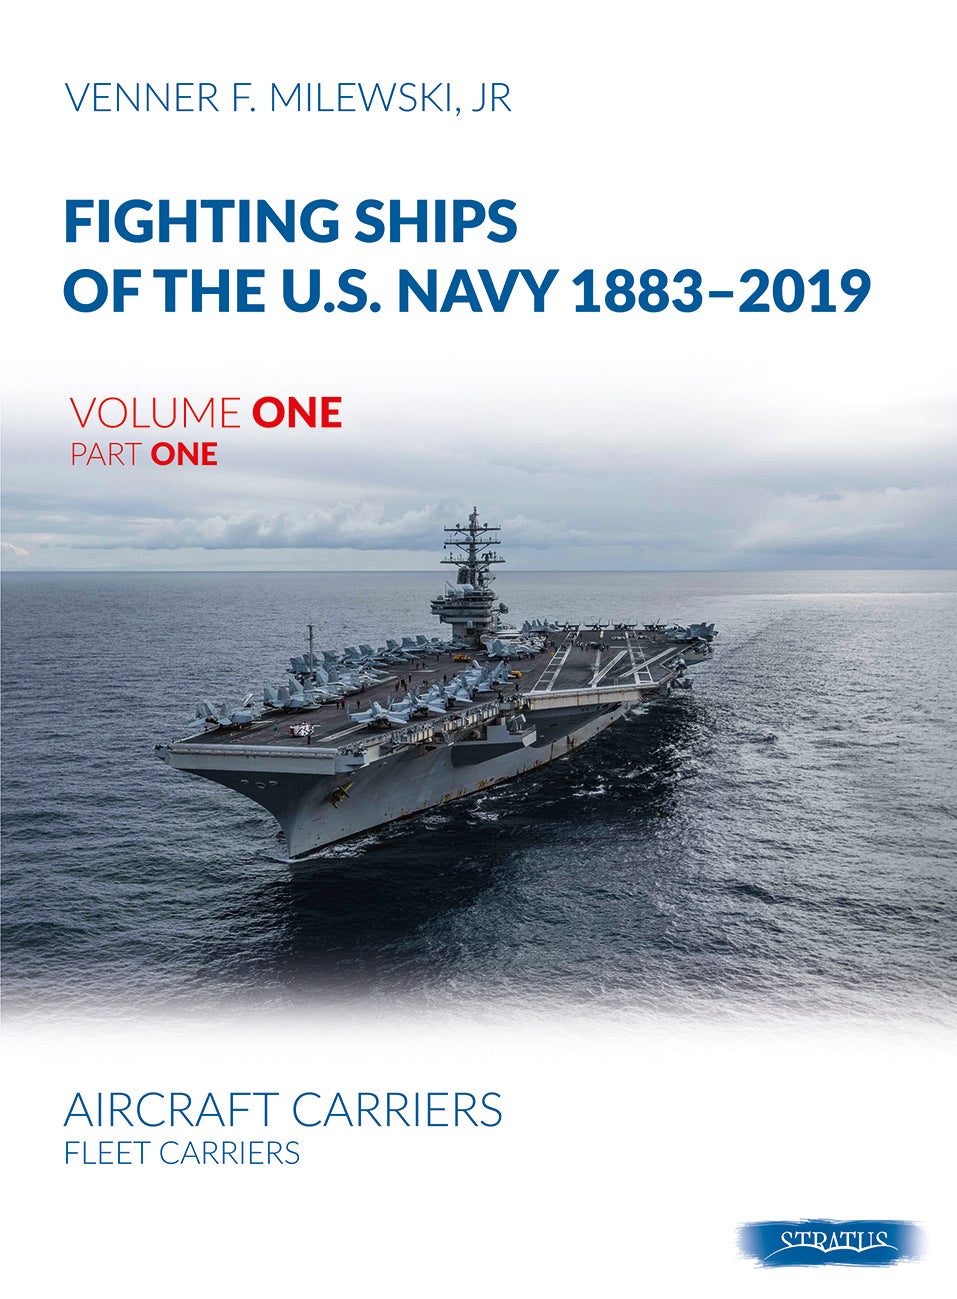 Fighting Ships of the U.S. Navy 1883-2019, Volume One